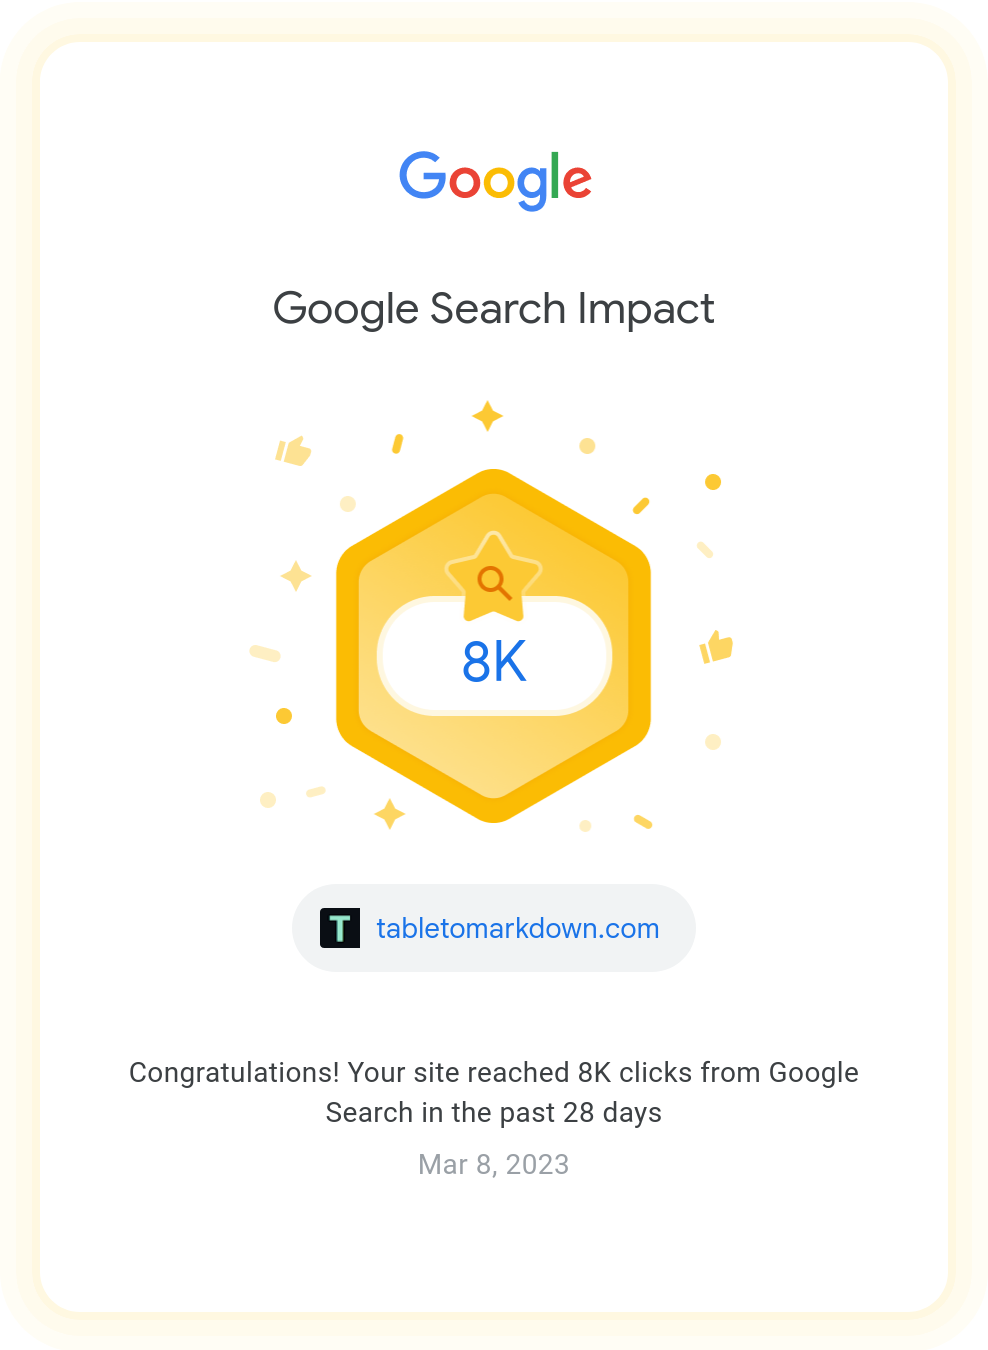 New record: 8,000 Clicks from Google in 4 weeks!